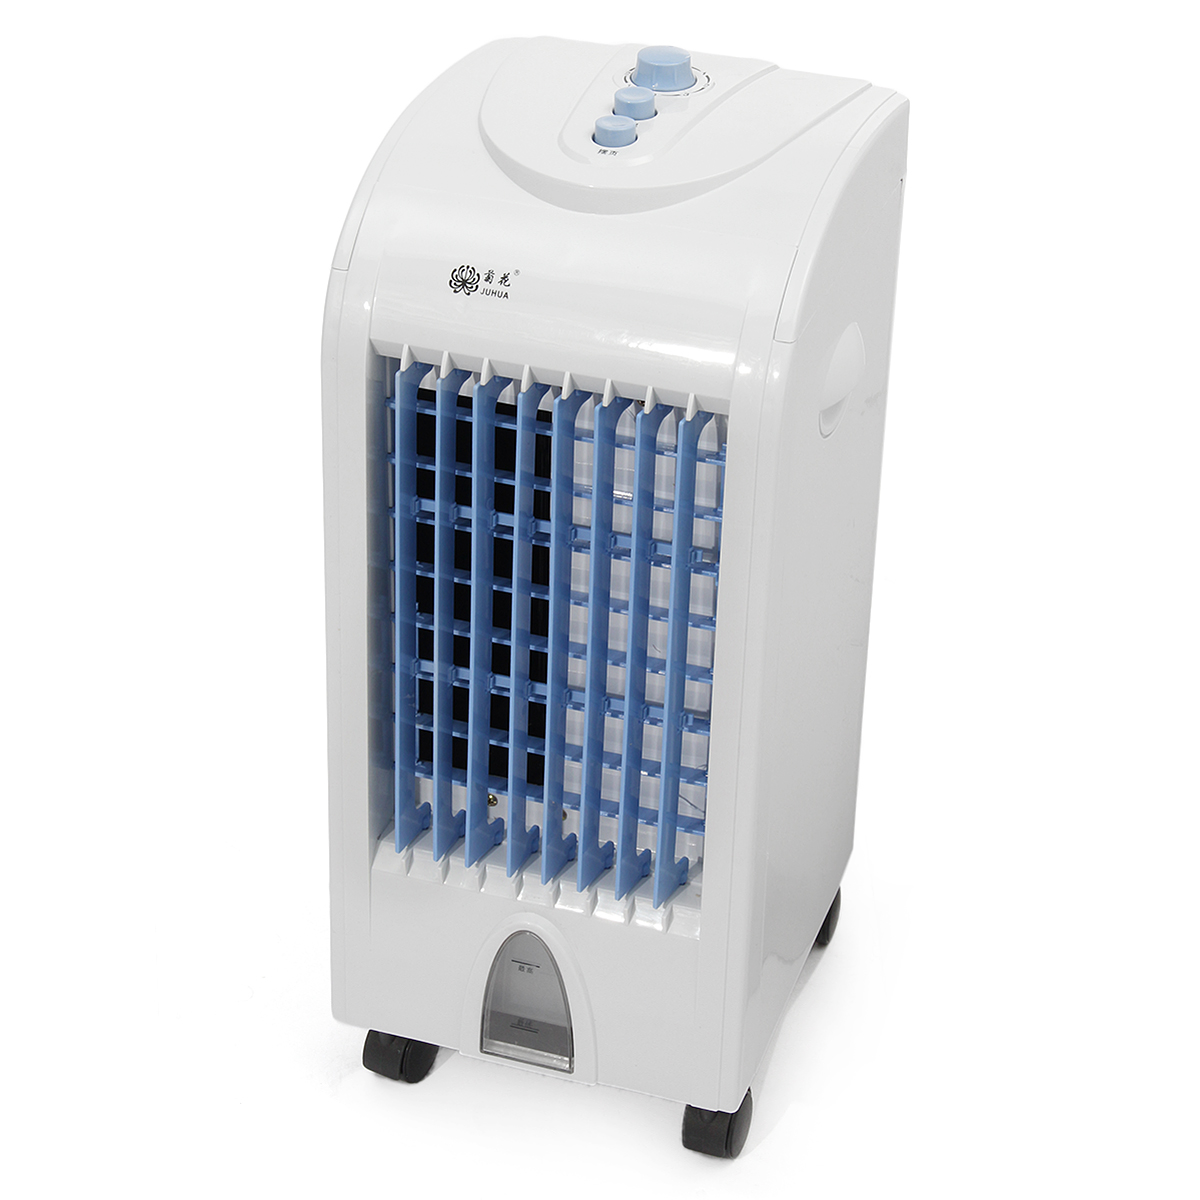 Portable-Air-Conditioner-Air-Conditioning-Fan-Water-Ice-Cooler-Humidifier-Room-1217000-4